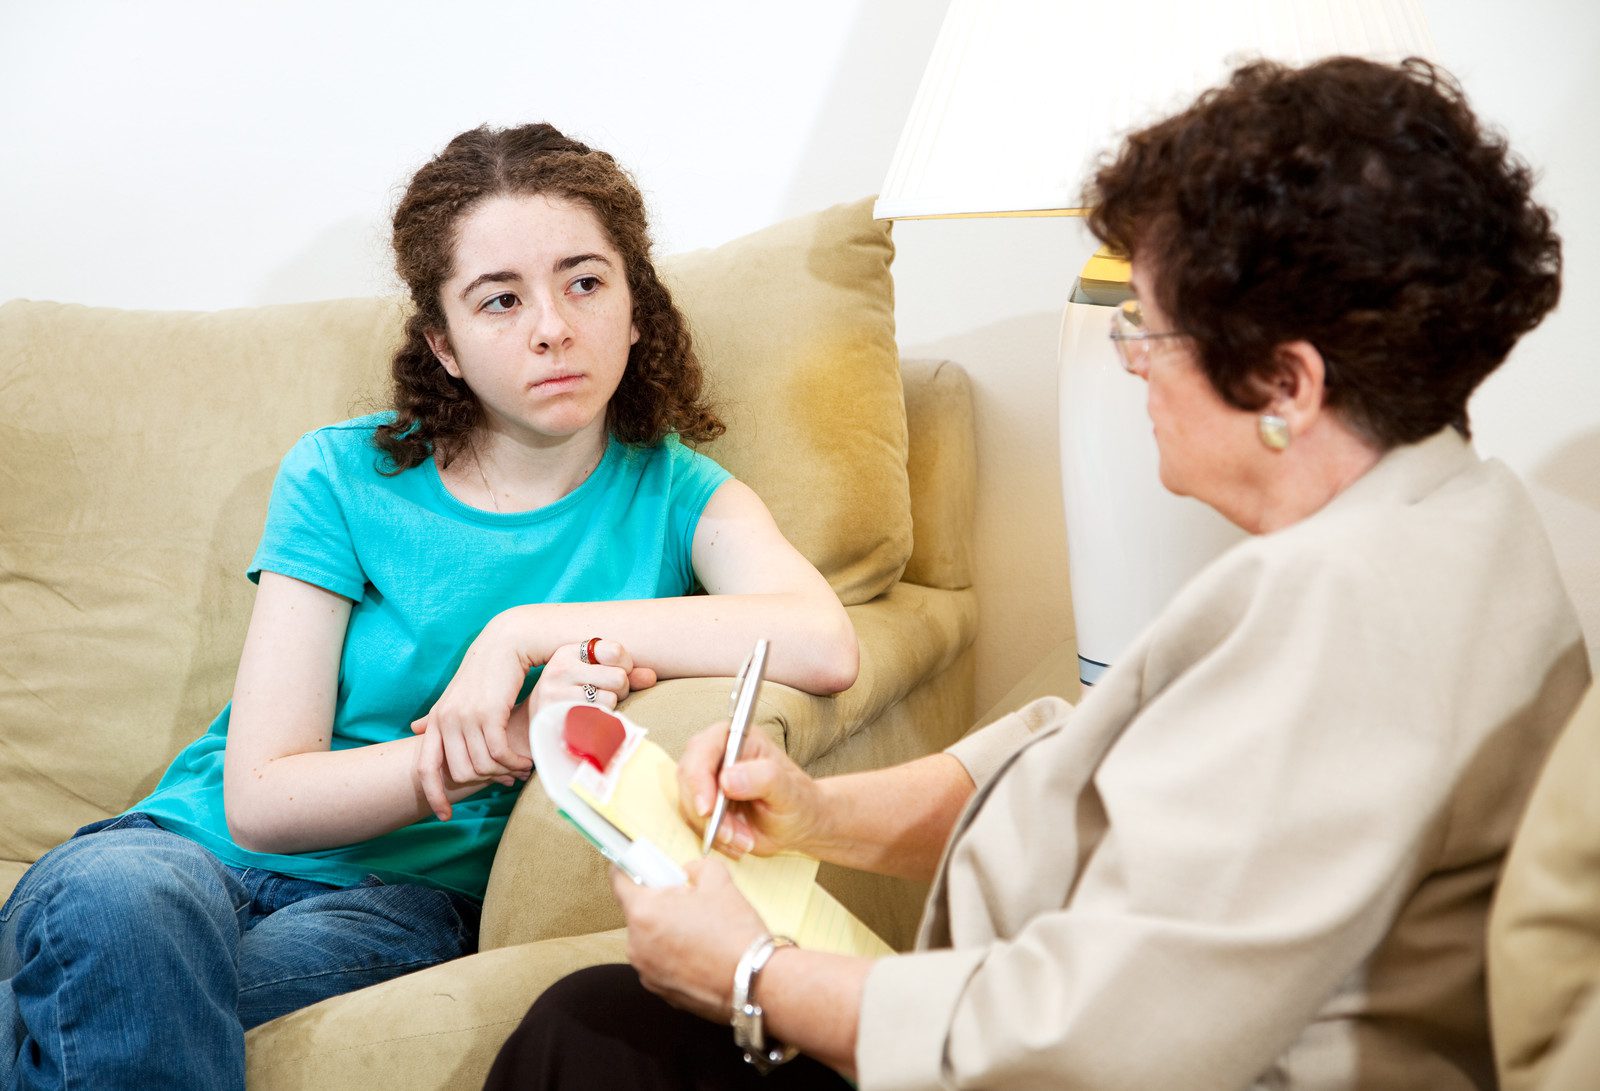 Seemingly depressed teen girl in therapy with a psychologist.